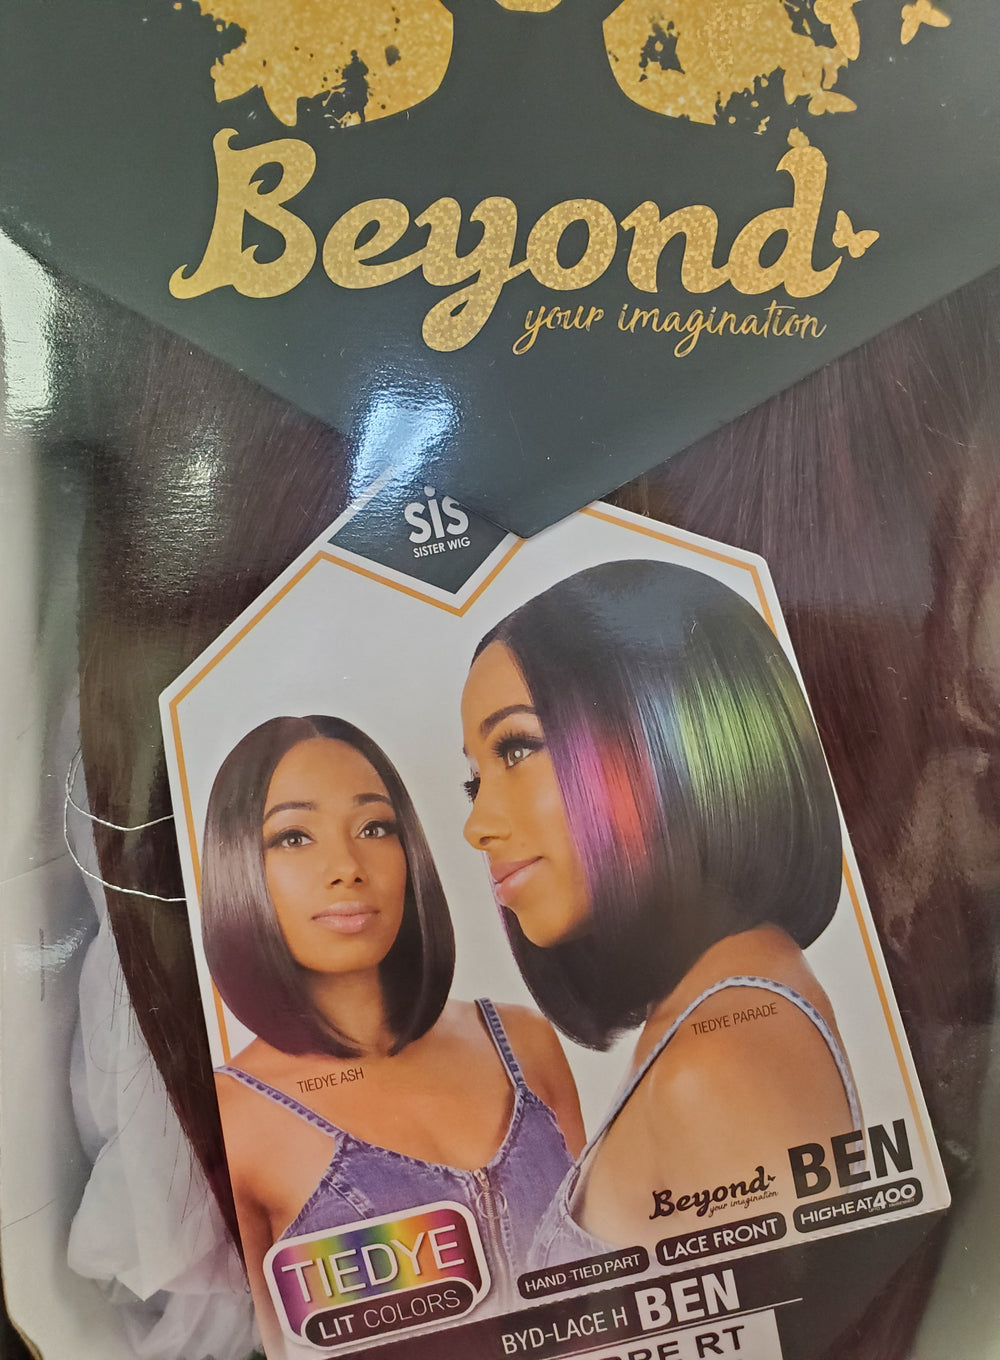 Lace front bob cut Zury Beyond Ben synthetic wig